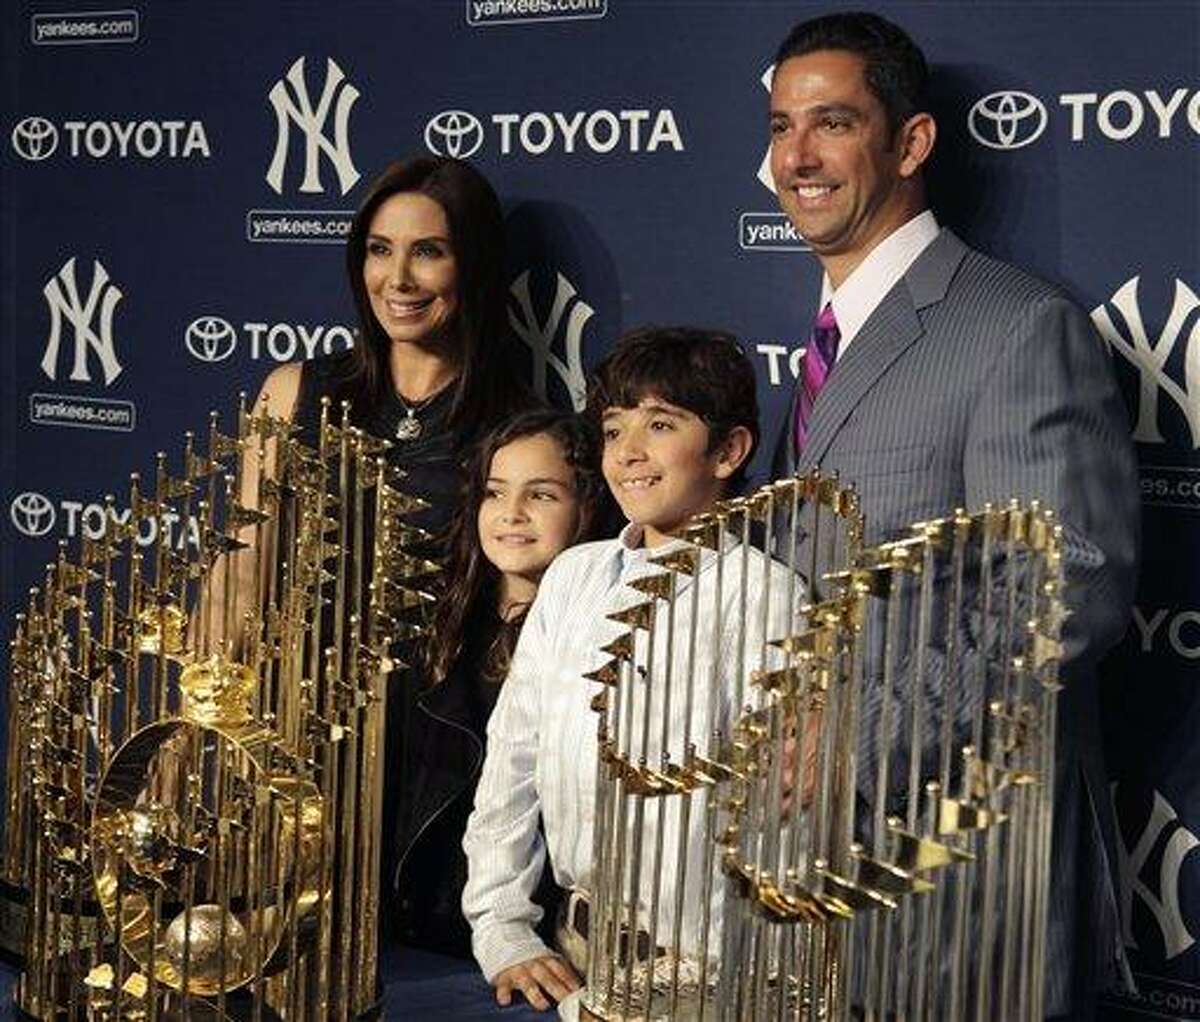 What Happened To Jorge Posada? Here's Where The Catcher Is Now